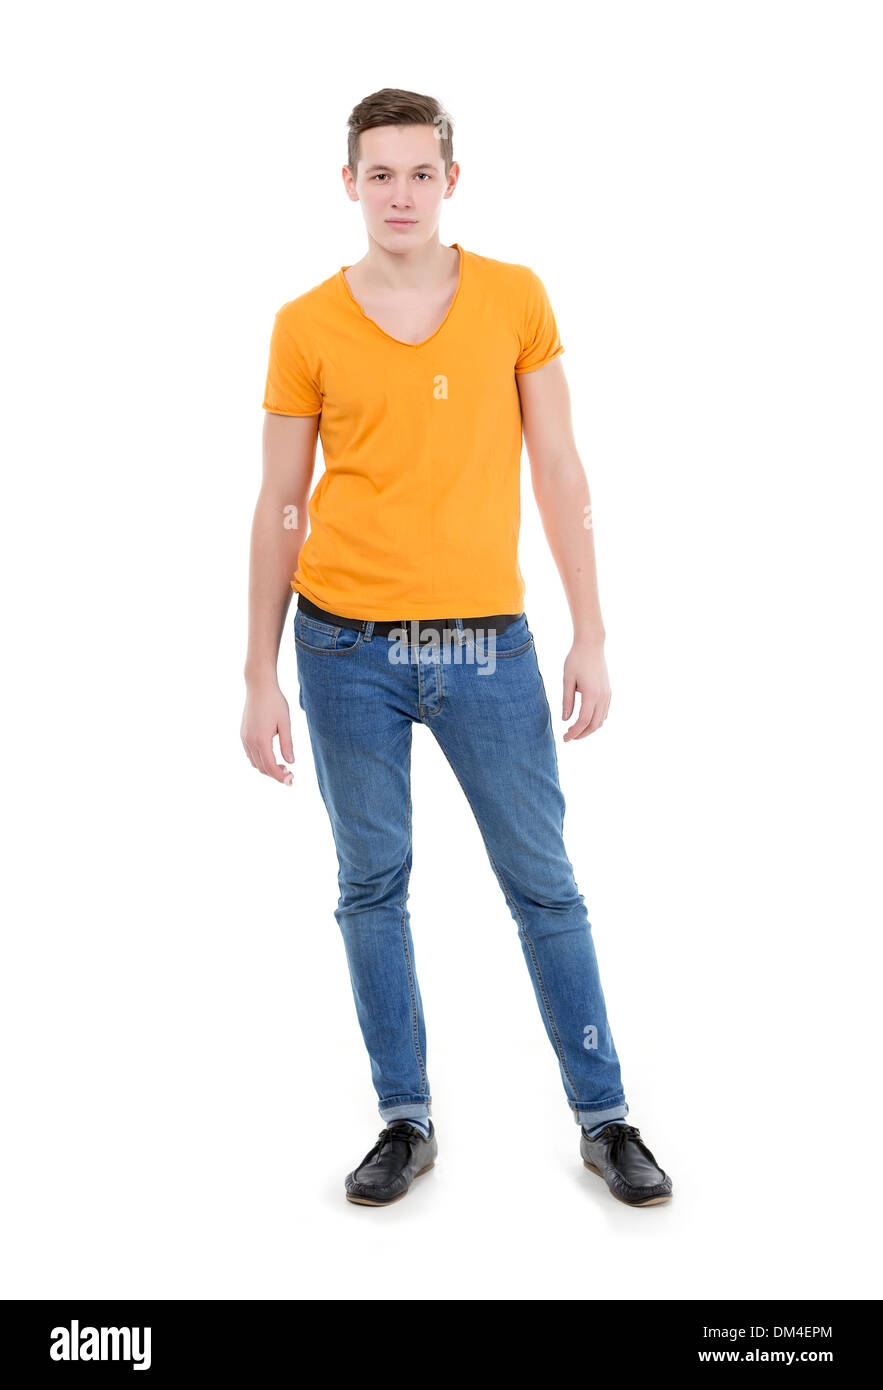 Man With Yellow Shirt And Jeans High ...